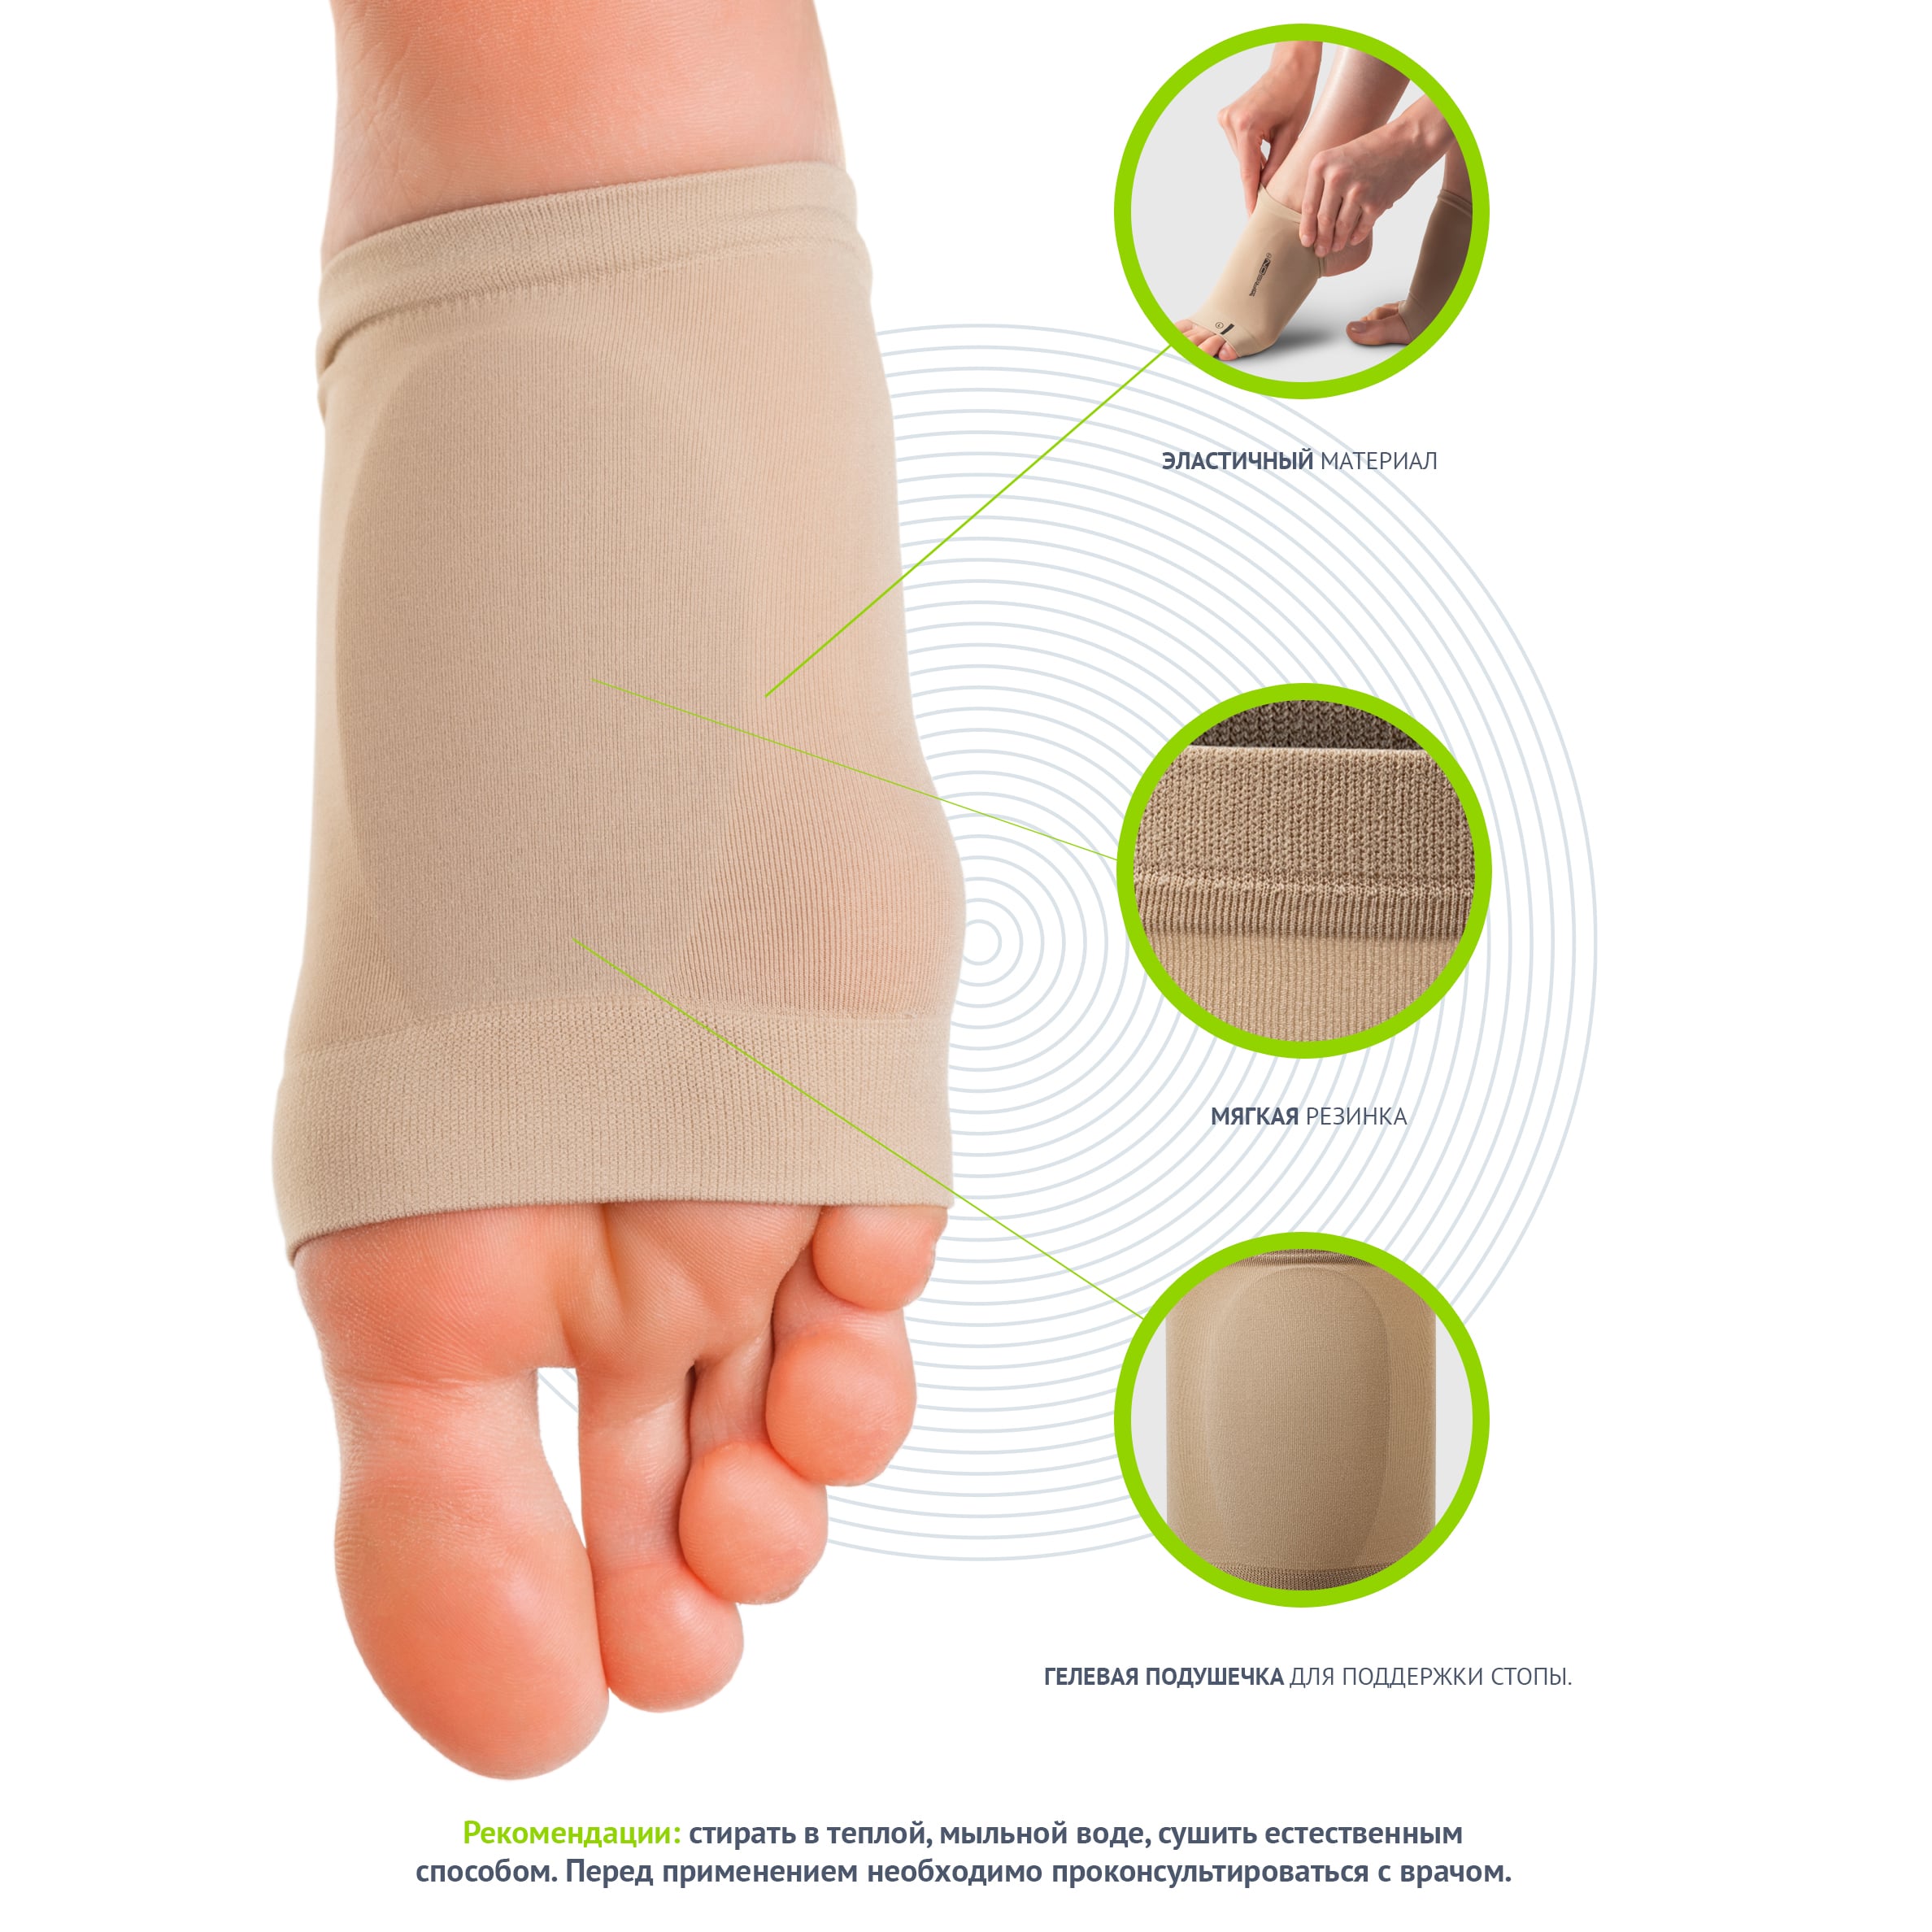 Arch Support Sleeves